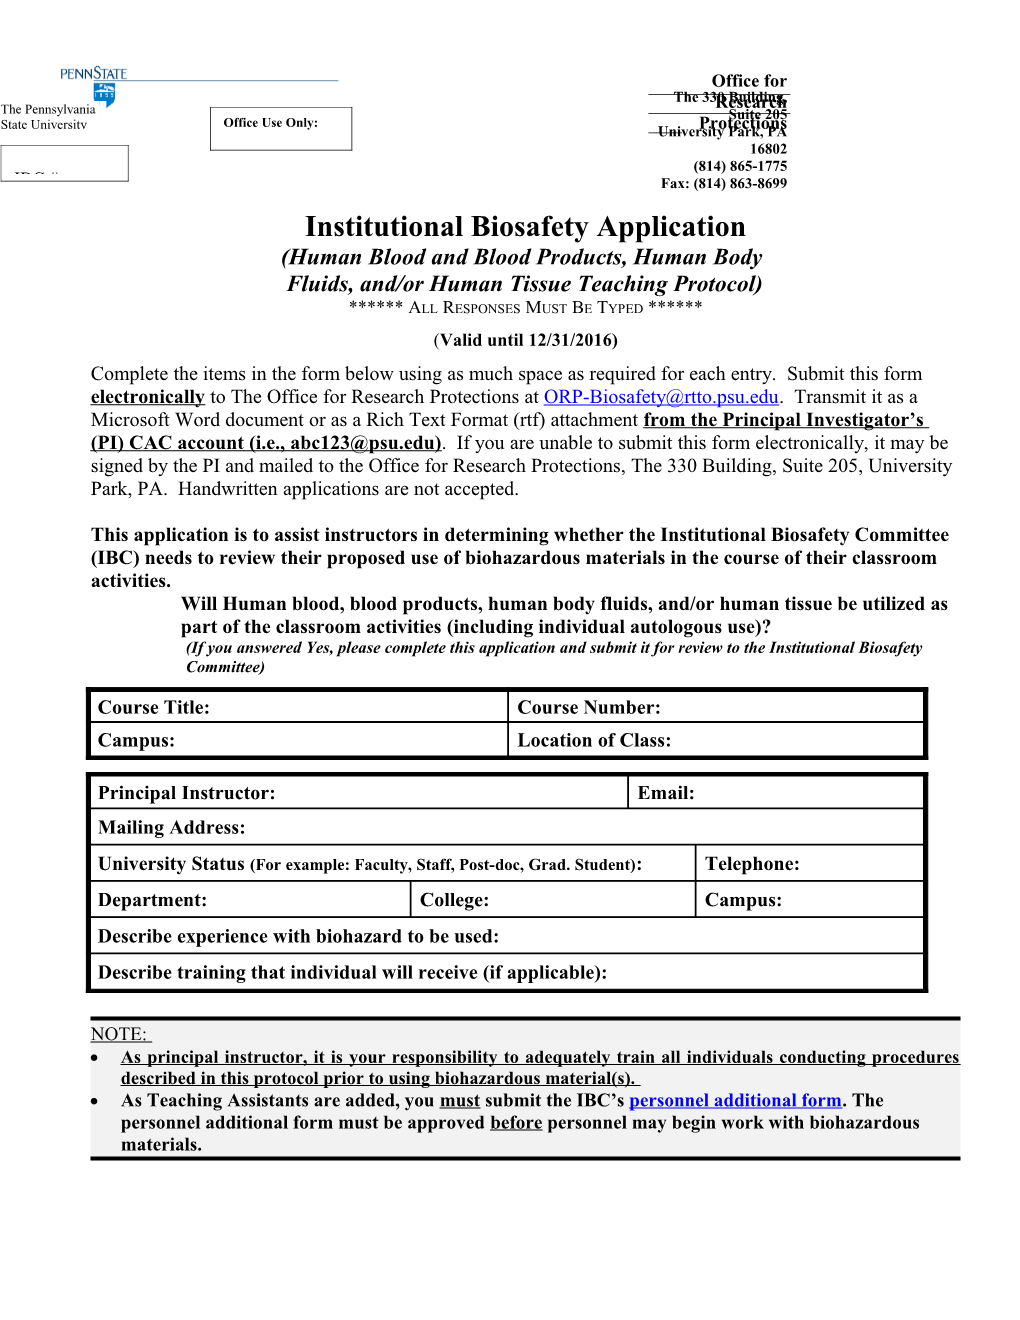 Institutional Biosafety Application